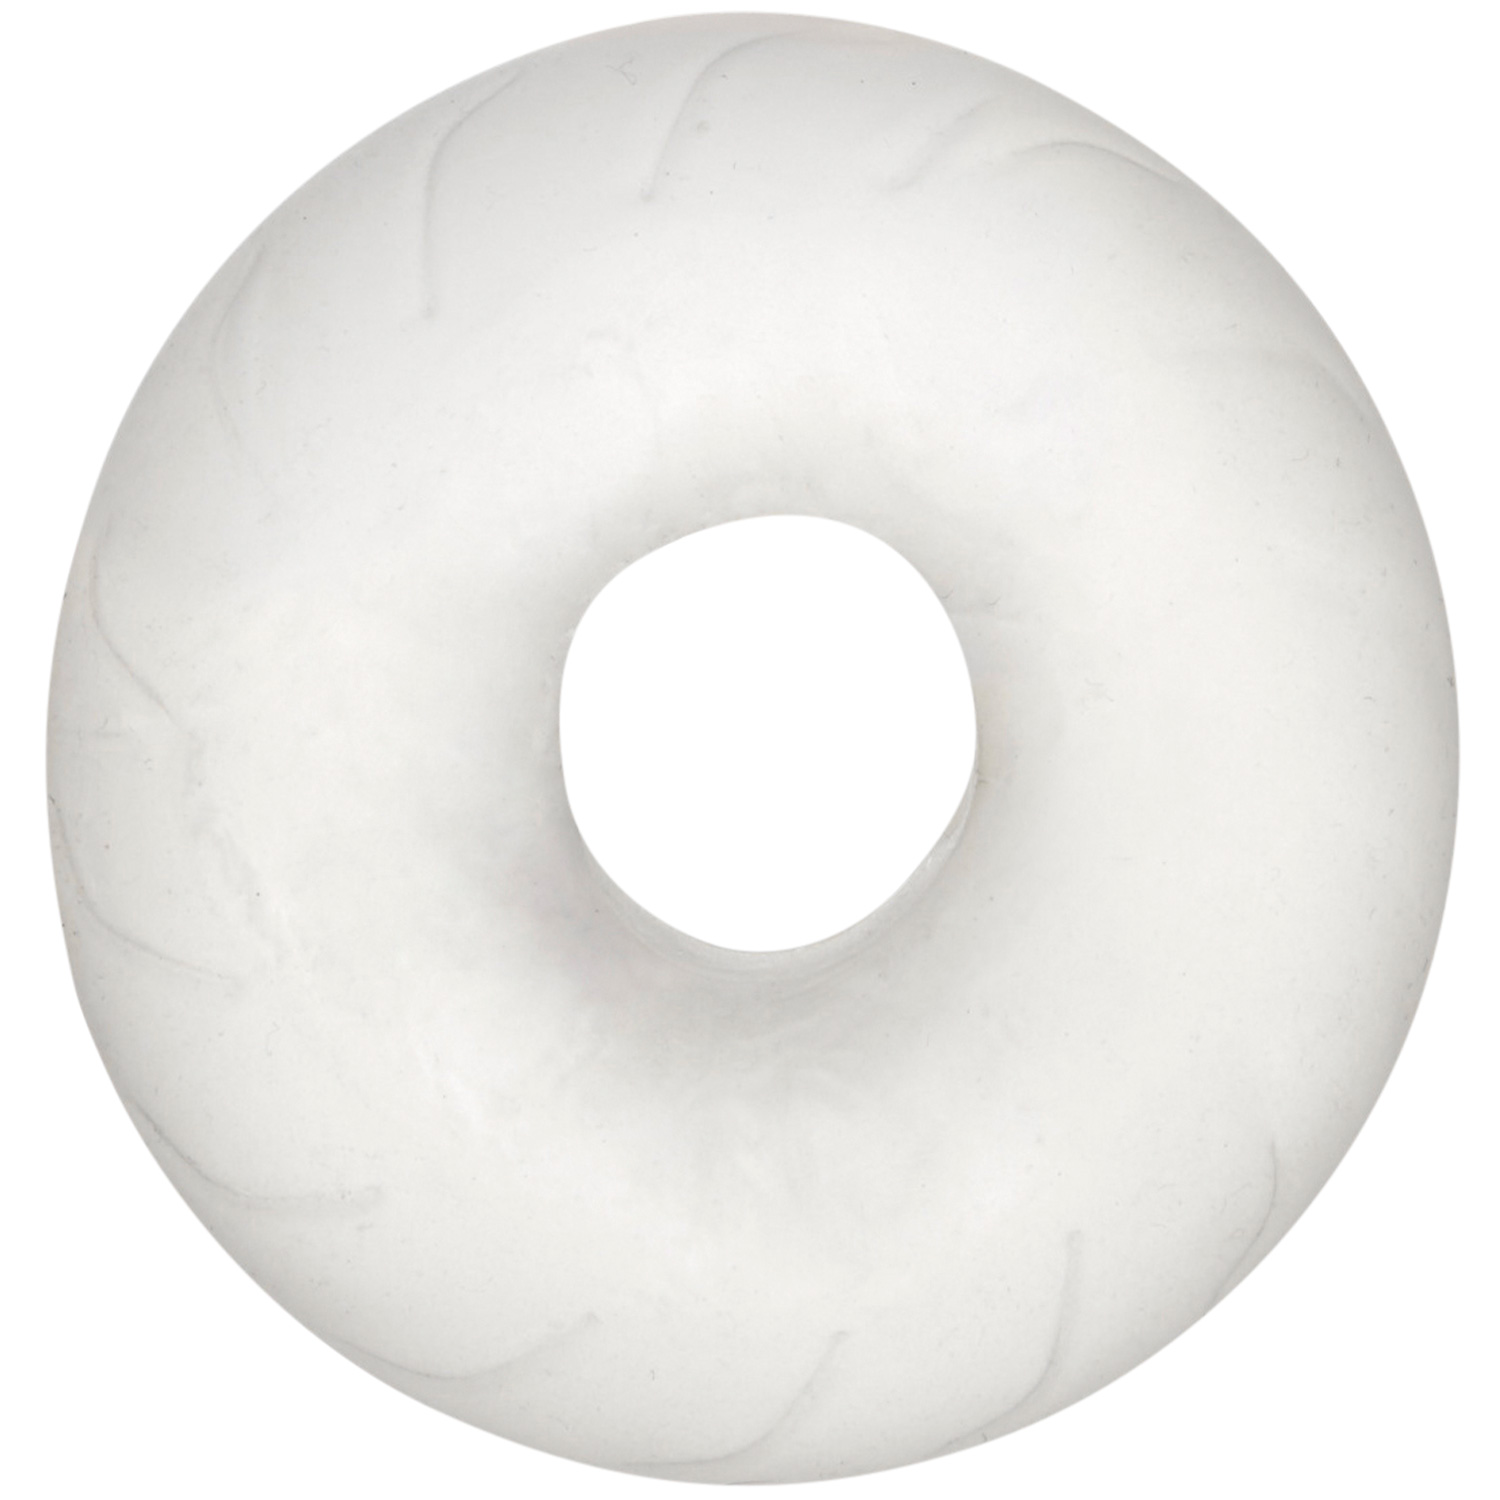 Sinful Donut Super Stretchy Penisring      - Clear